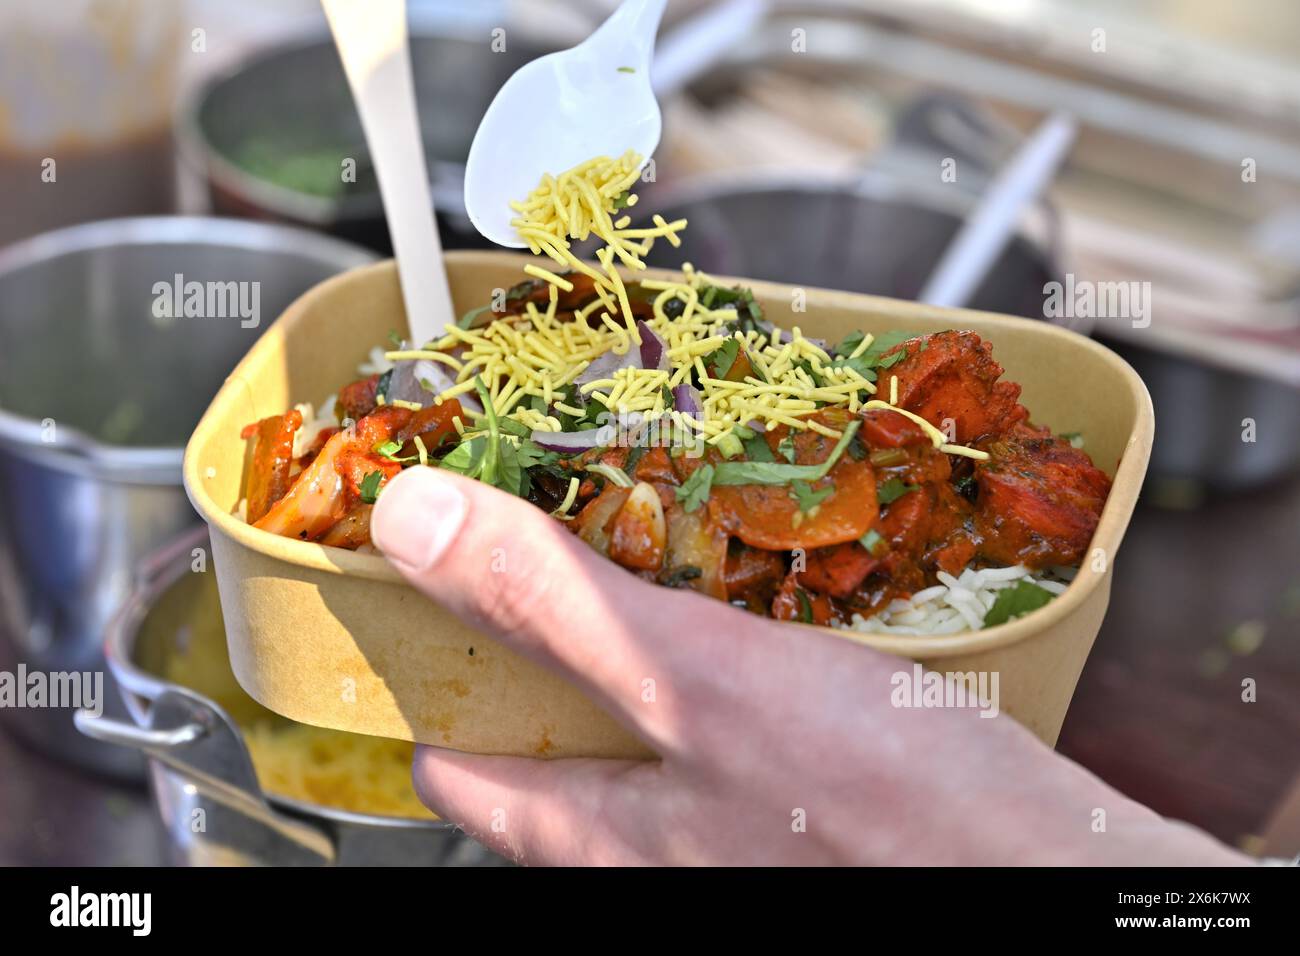 Close up of Indian takeaway food, curry with rice, in cardboard bowl to meet modern UK waste directives, from market stall Stock Photo